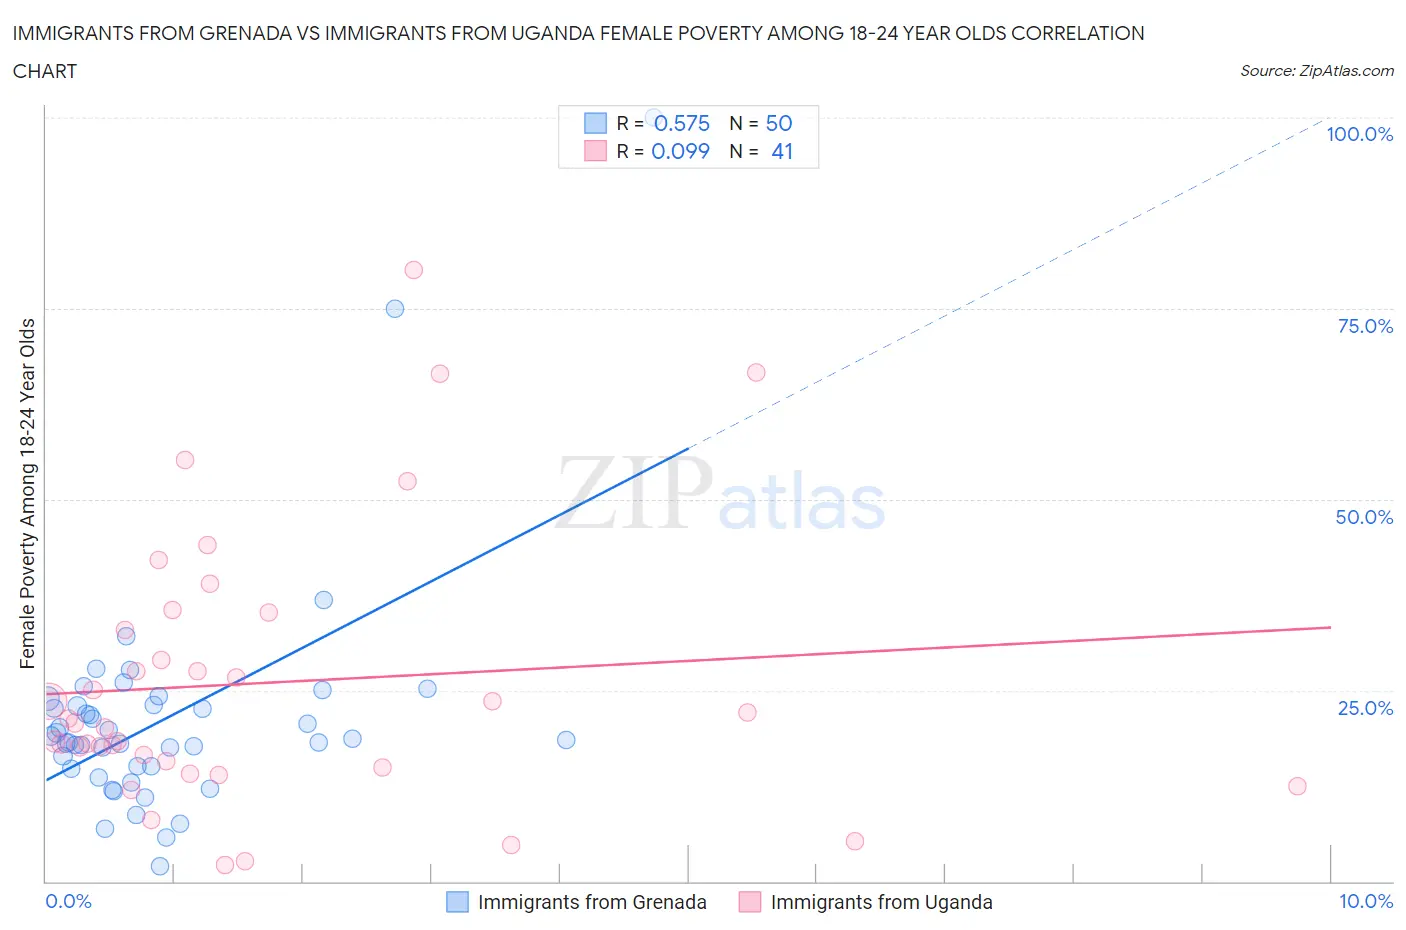 Immigrants from Grenada vs Immigrants from Uganda Female Poverty Among 18-24 Year Olds